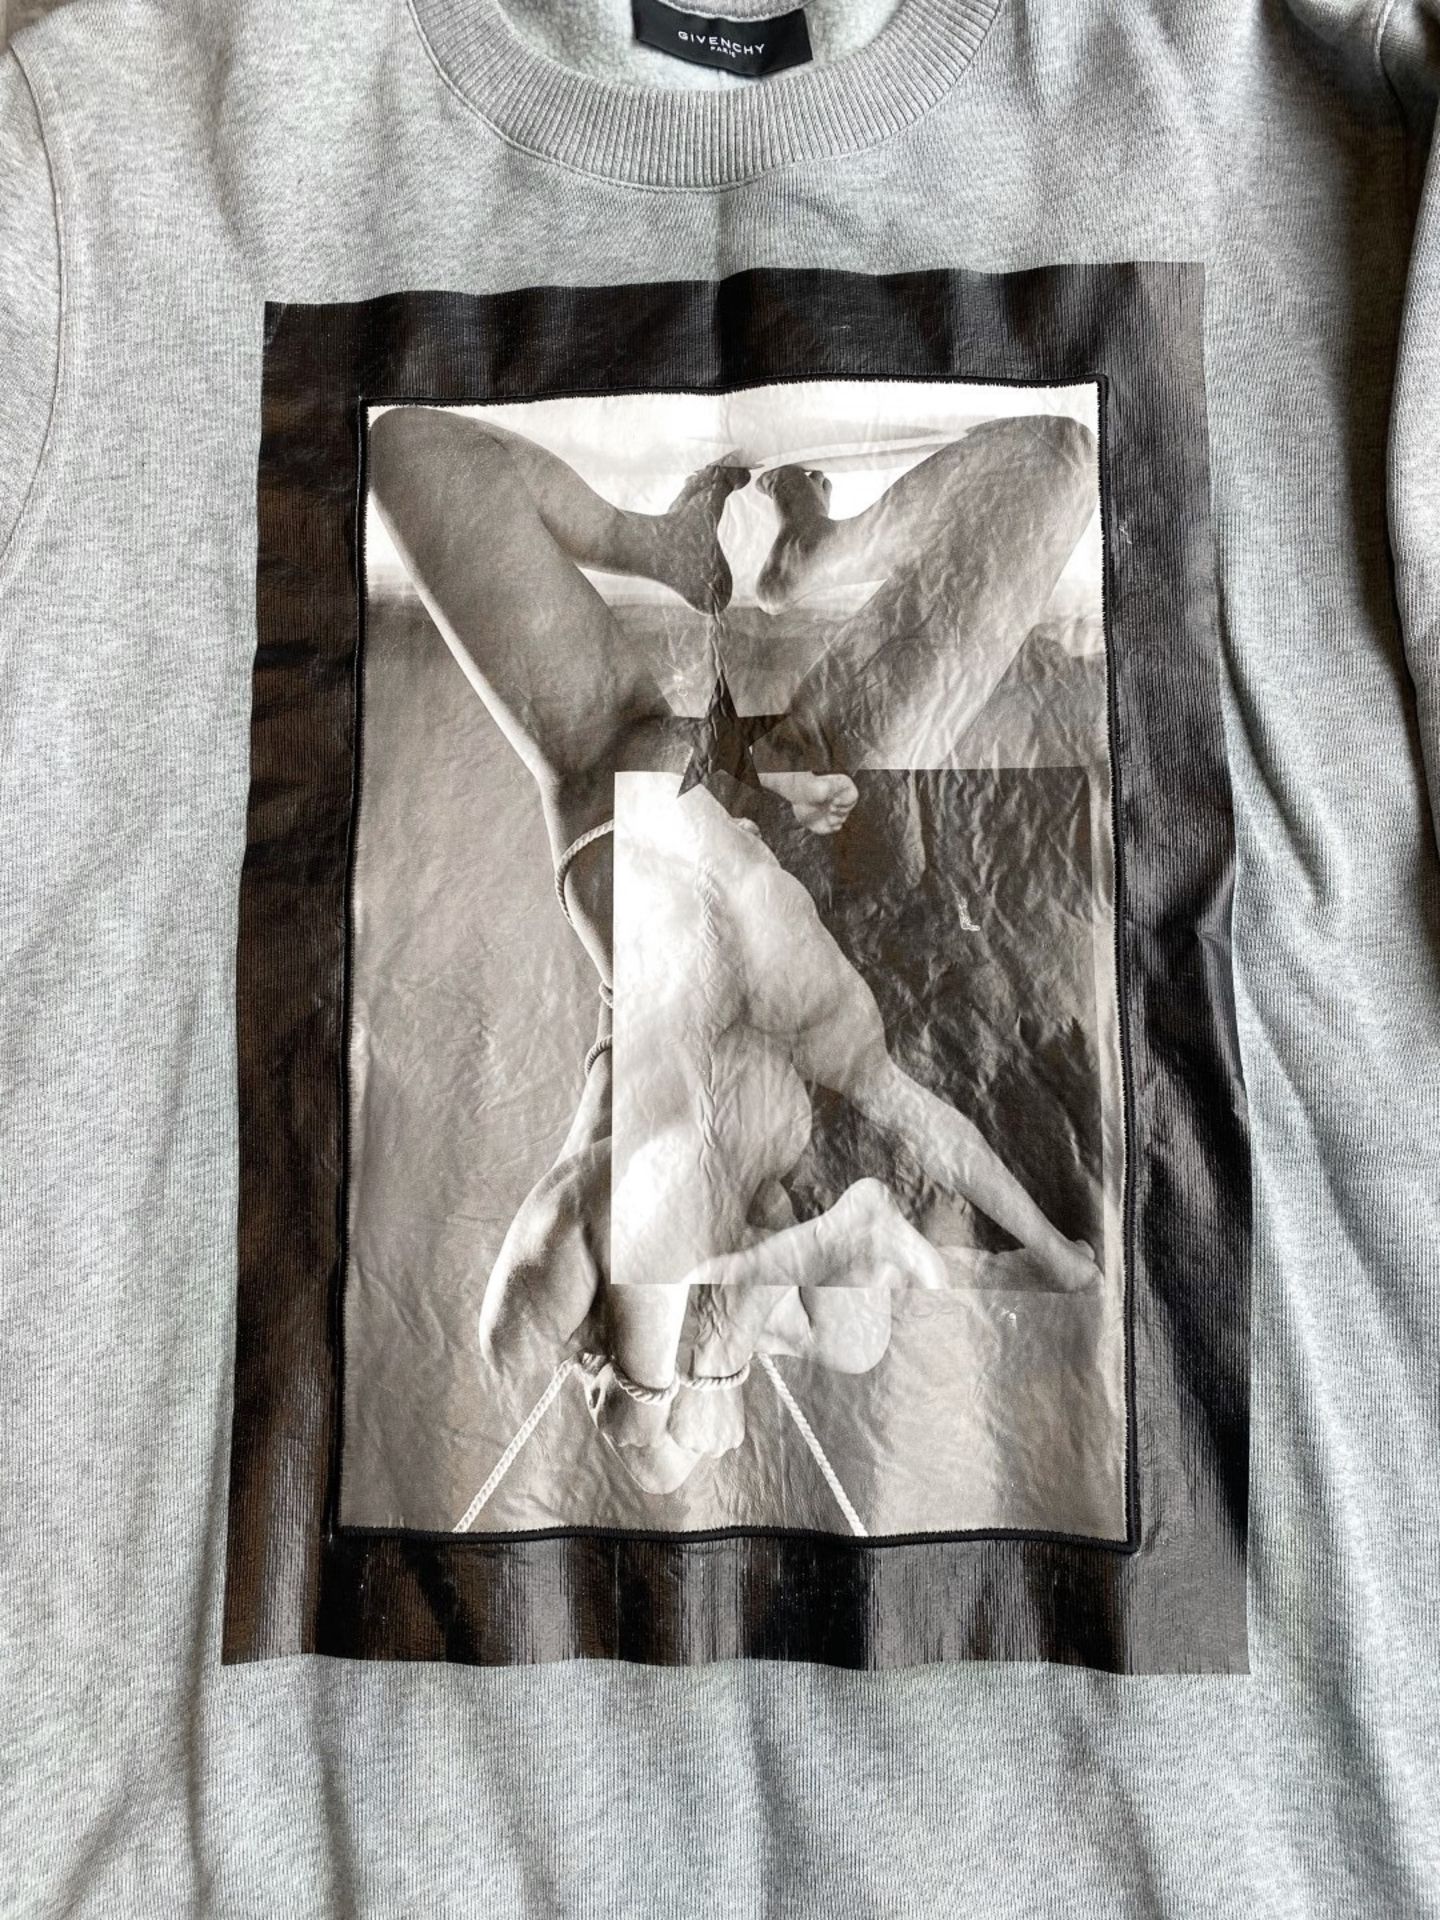 1 x Men's Genuine Givenchy Sweatshirt In Grey With Lambskin Panel On Front With Embroidered Border - Image 6 of 9